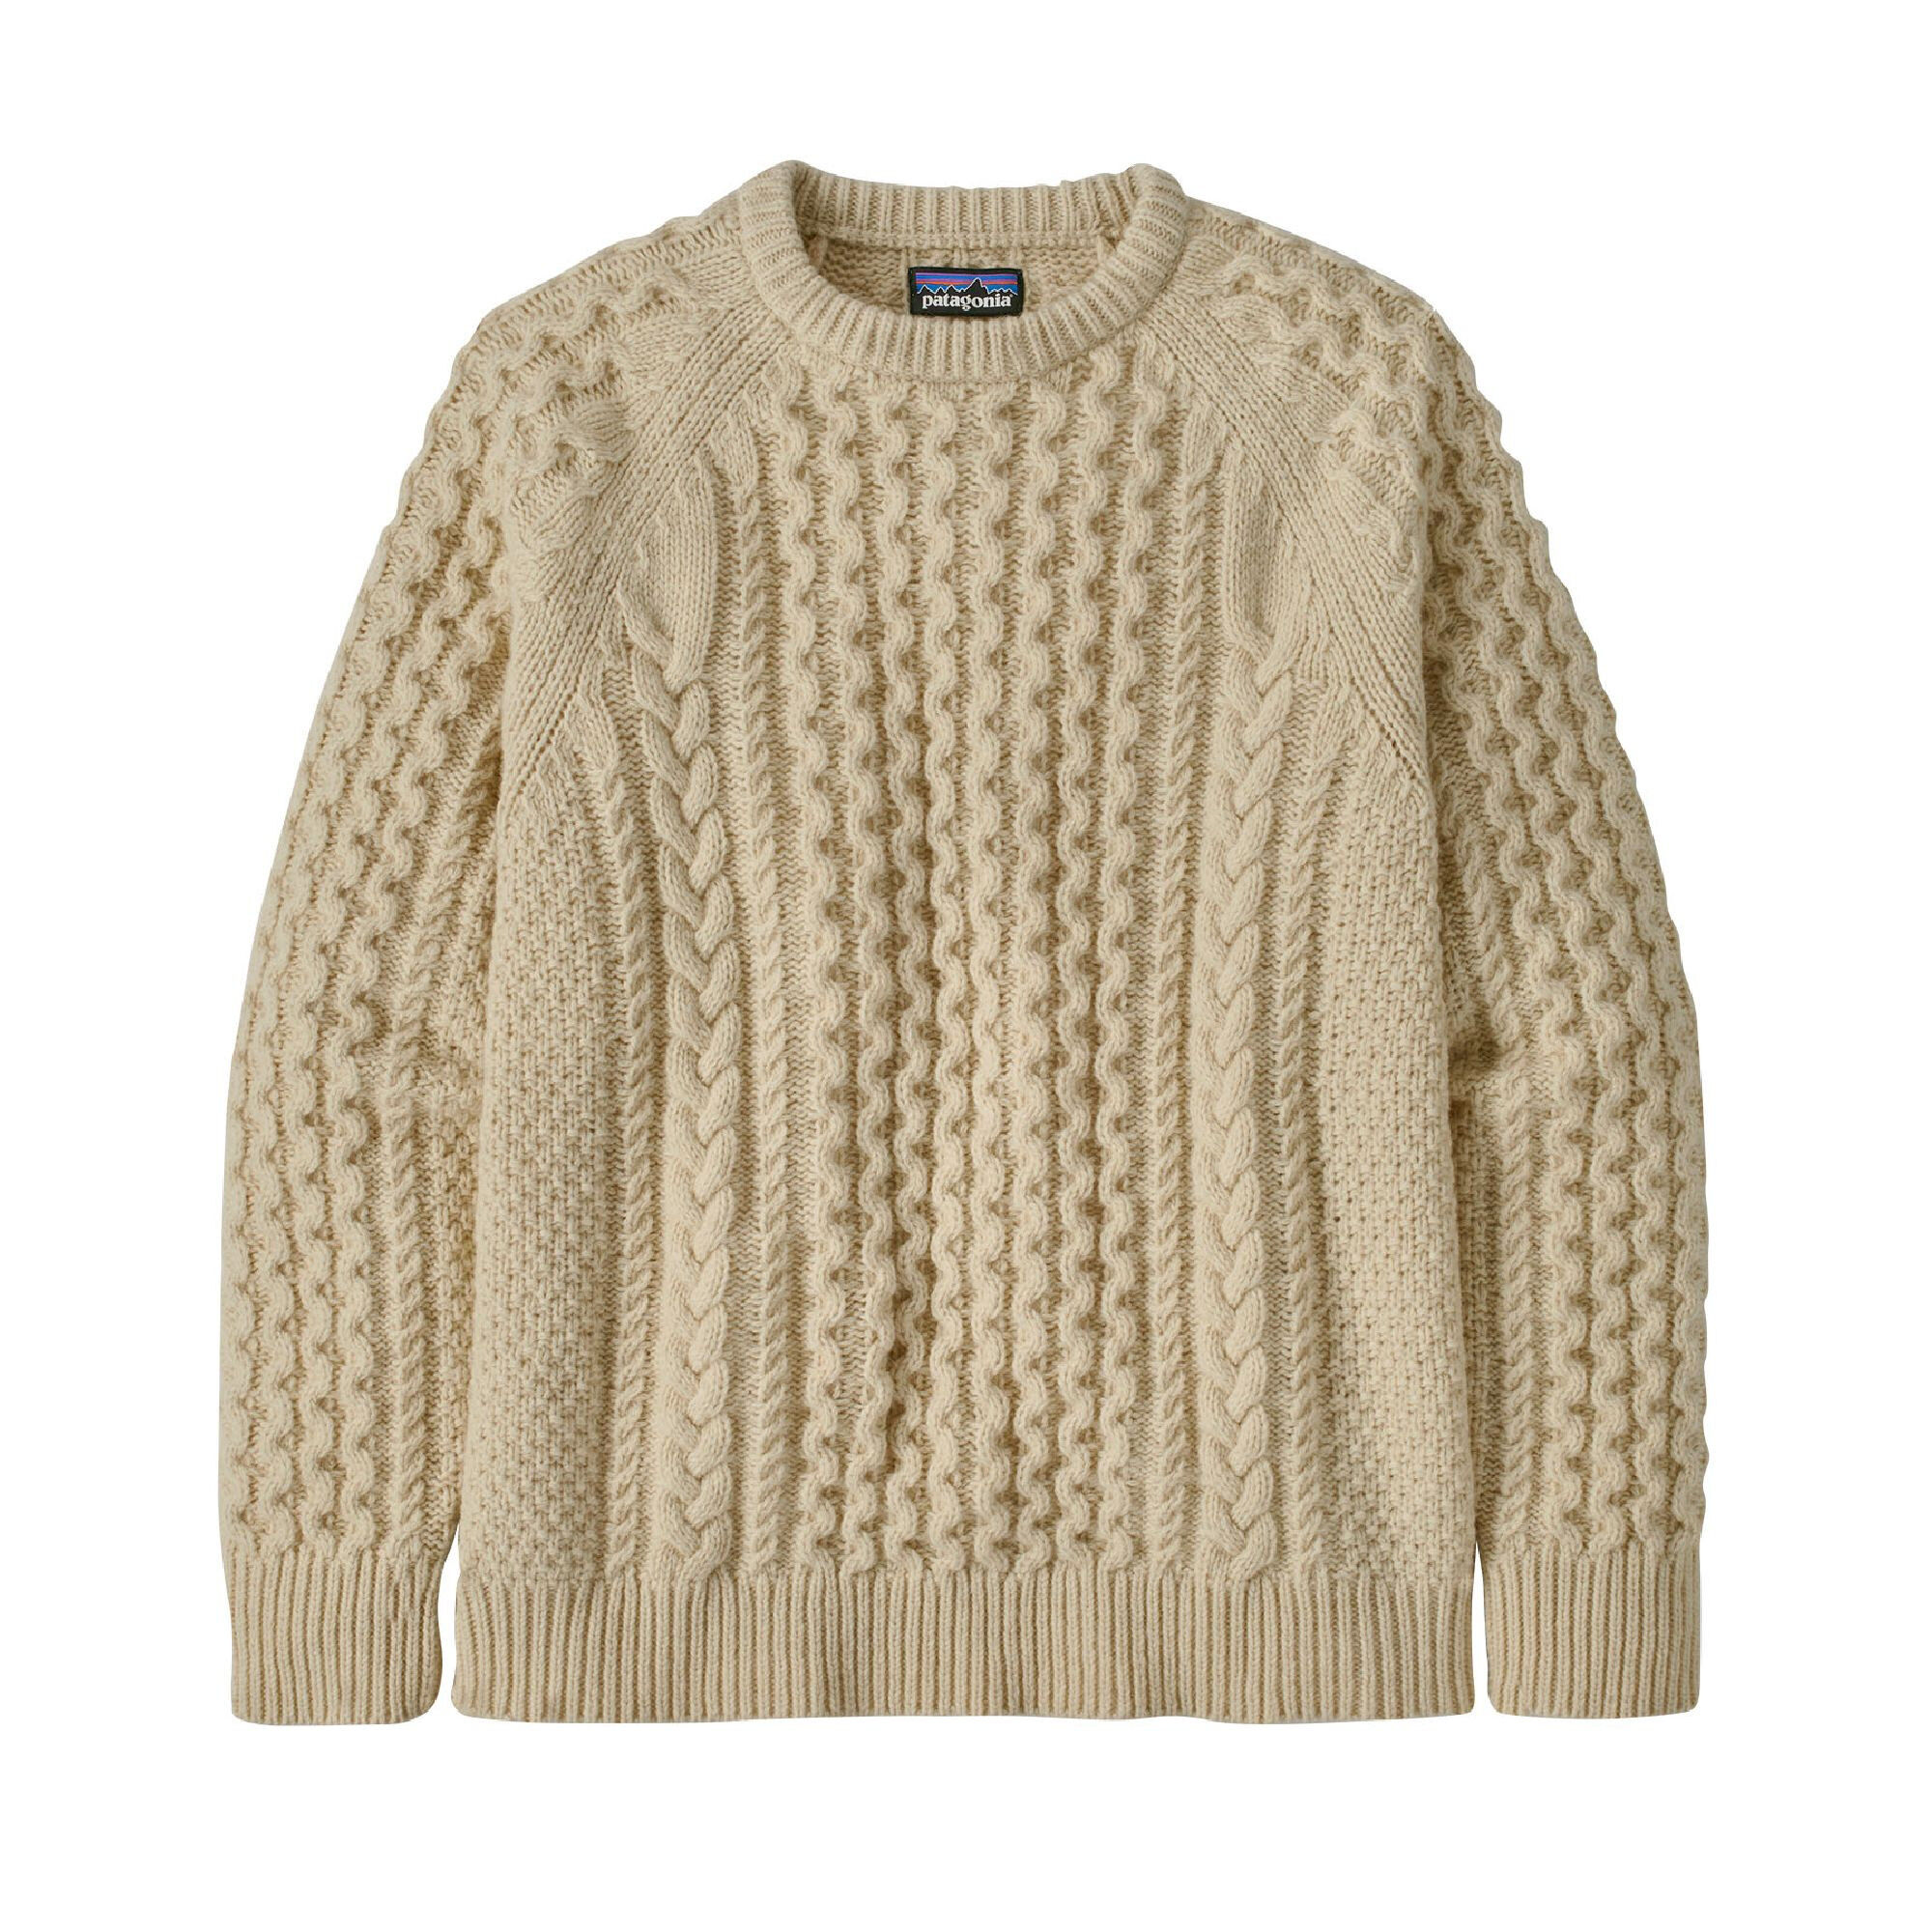 Patagonia Recycled Wool-Blend Cable Knit Crewneck Sweater - Trui | Hardloop